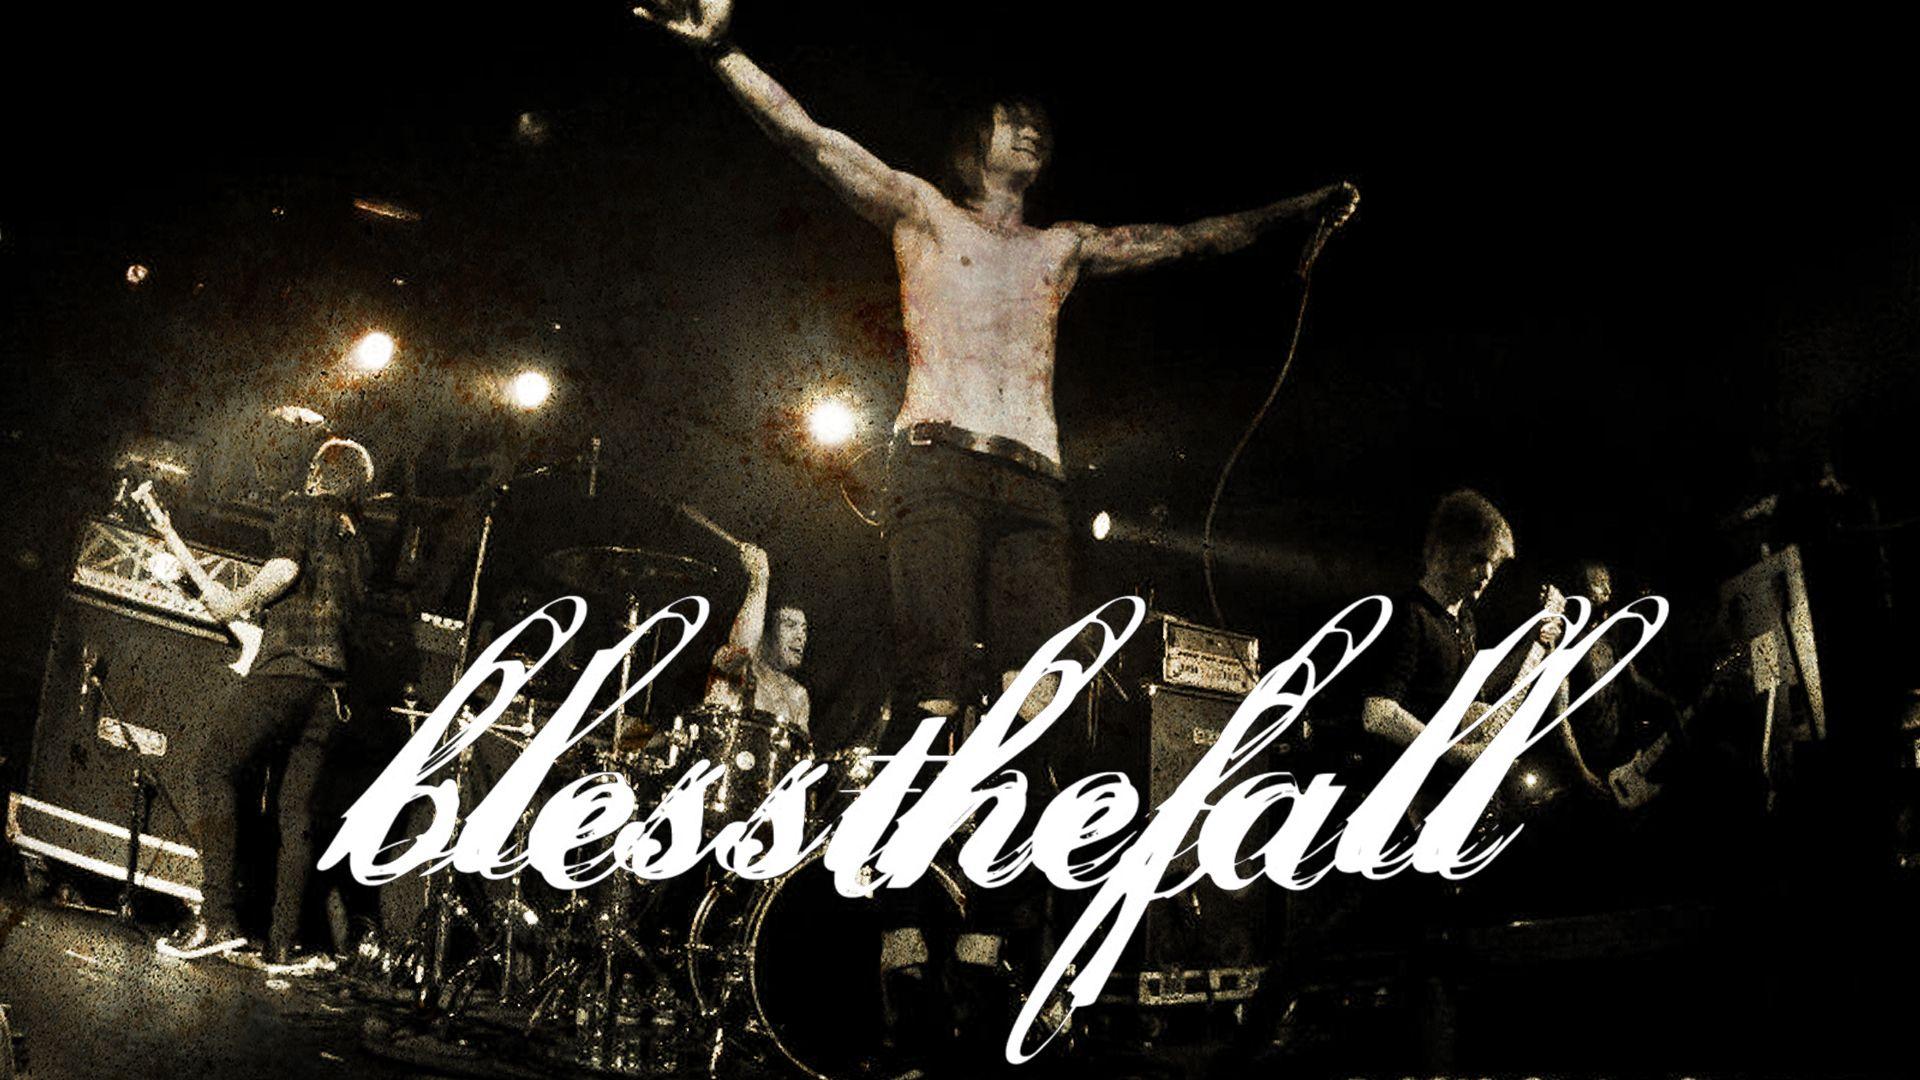 Wallpaper.wiki Blessthefall HD Background PIC WPB0014487. Wallpaper